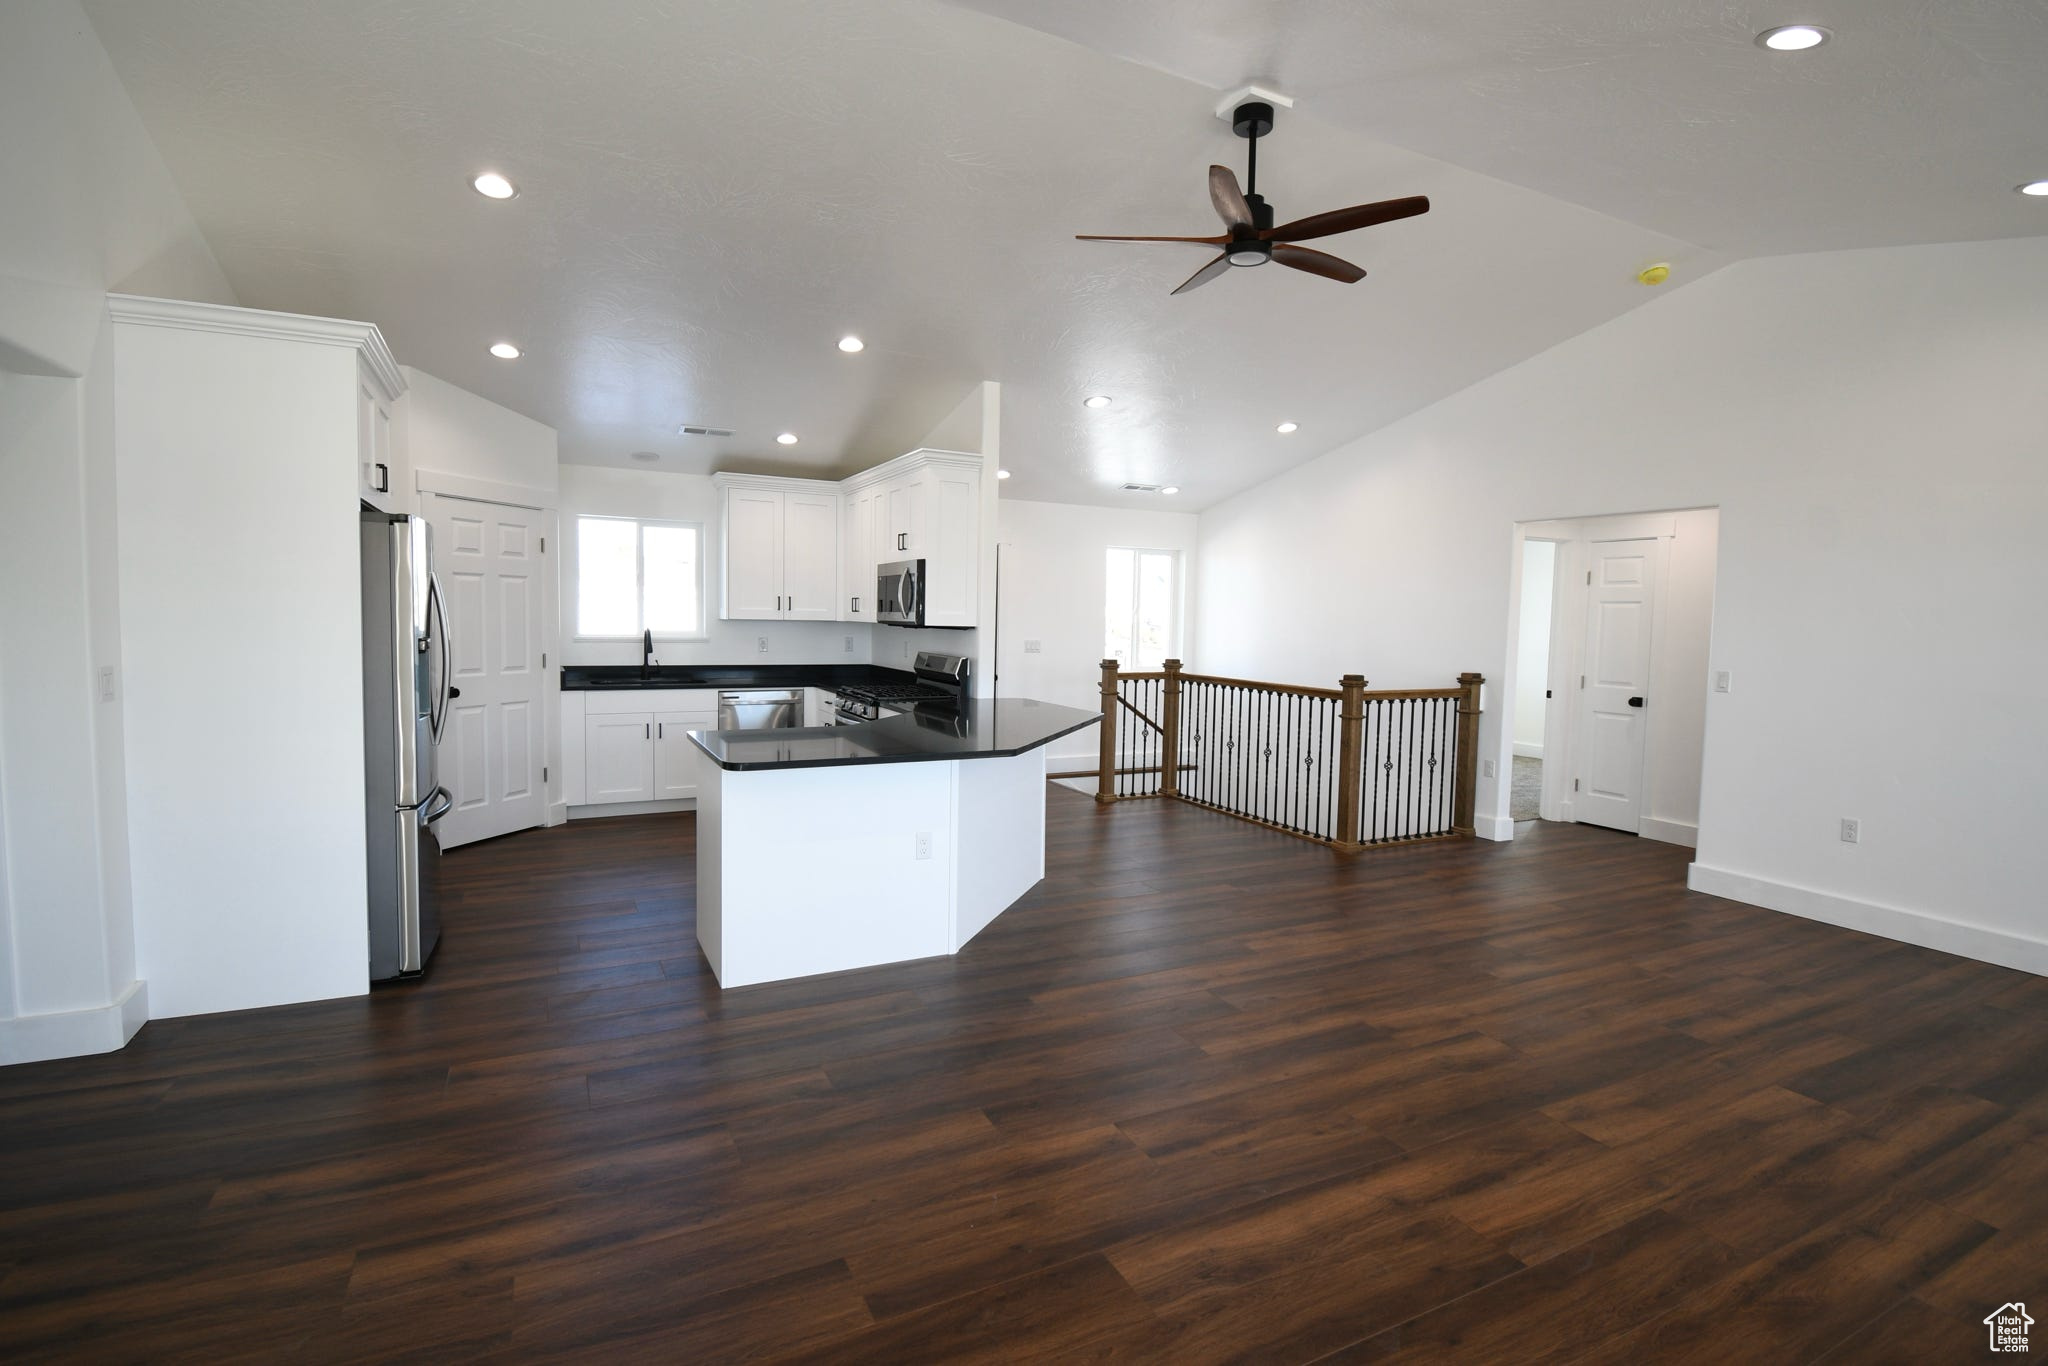 Kitchen with lofted ceiling, ceiling fan, dark wood-type flooring, white cabinetry, and stainless steel appliances